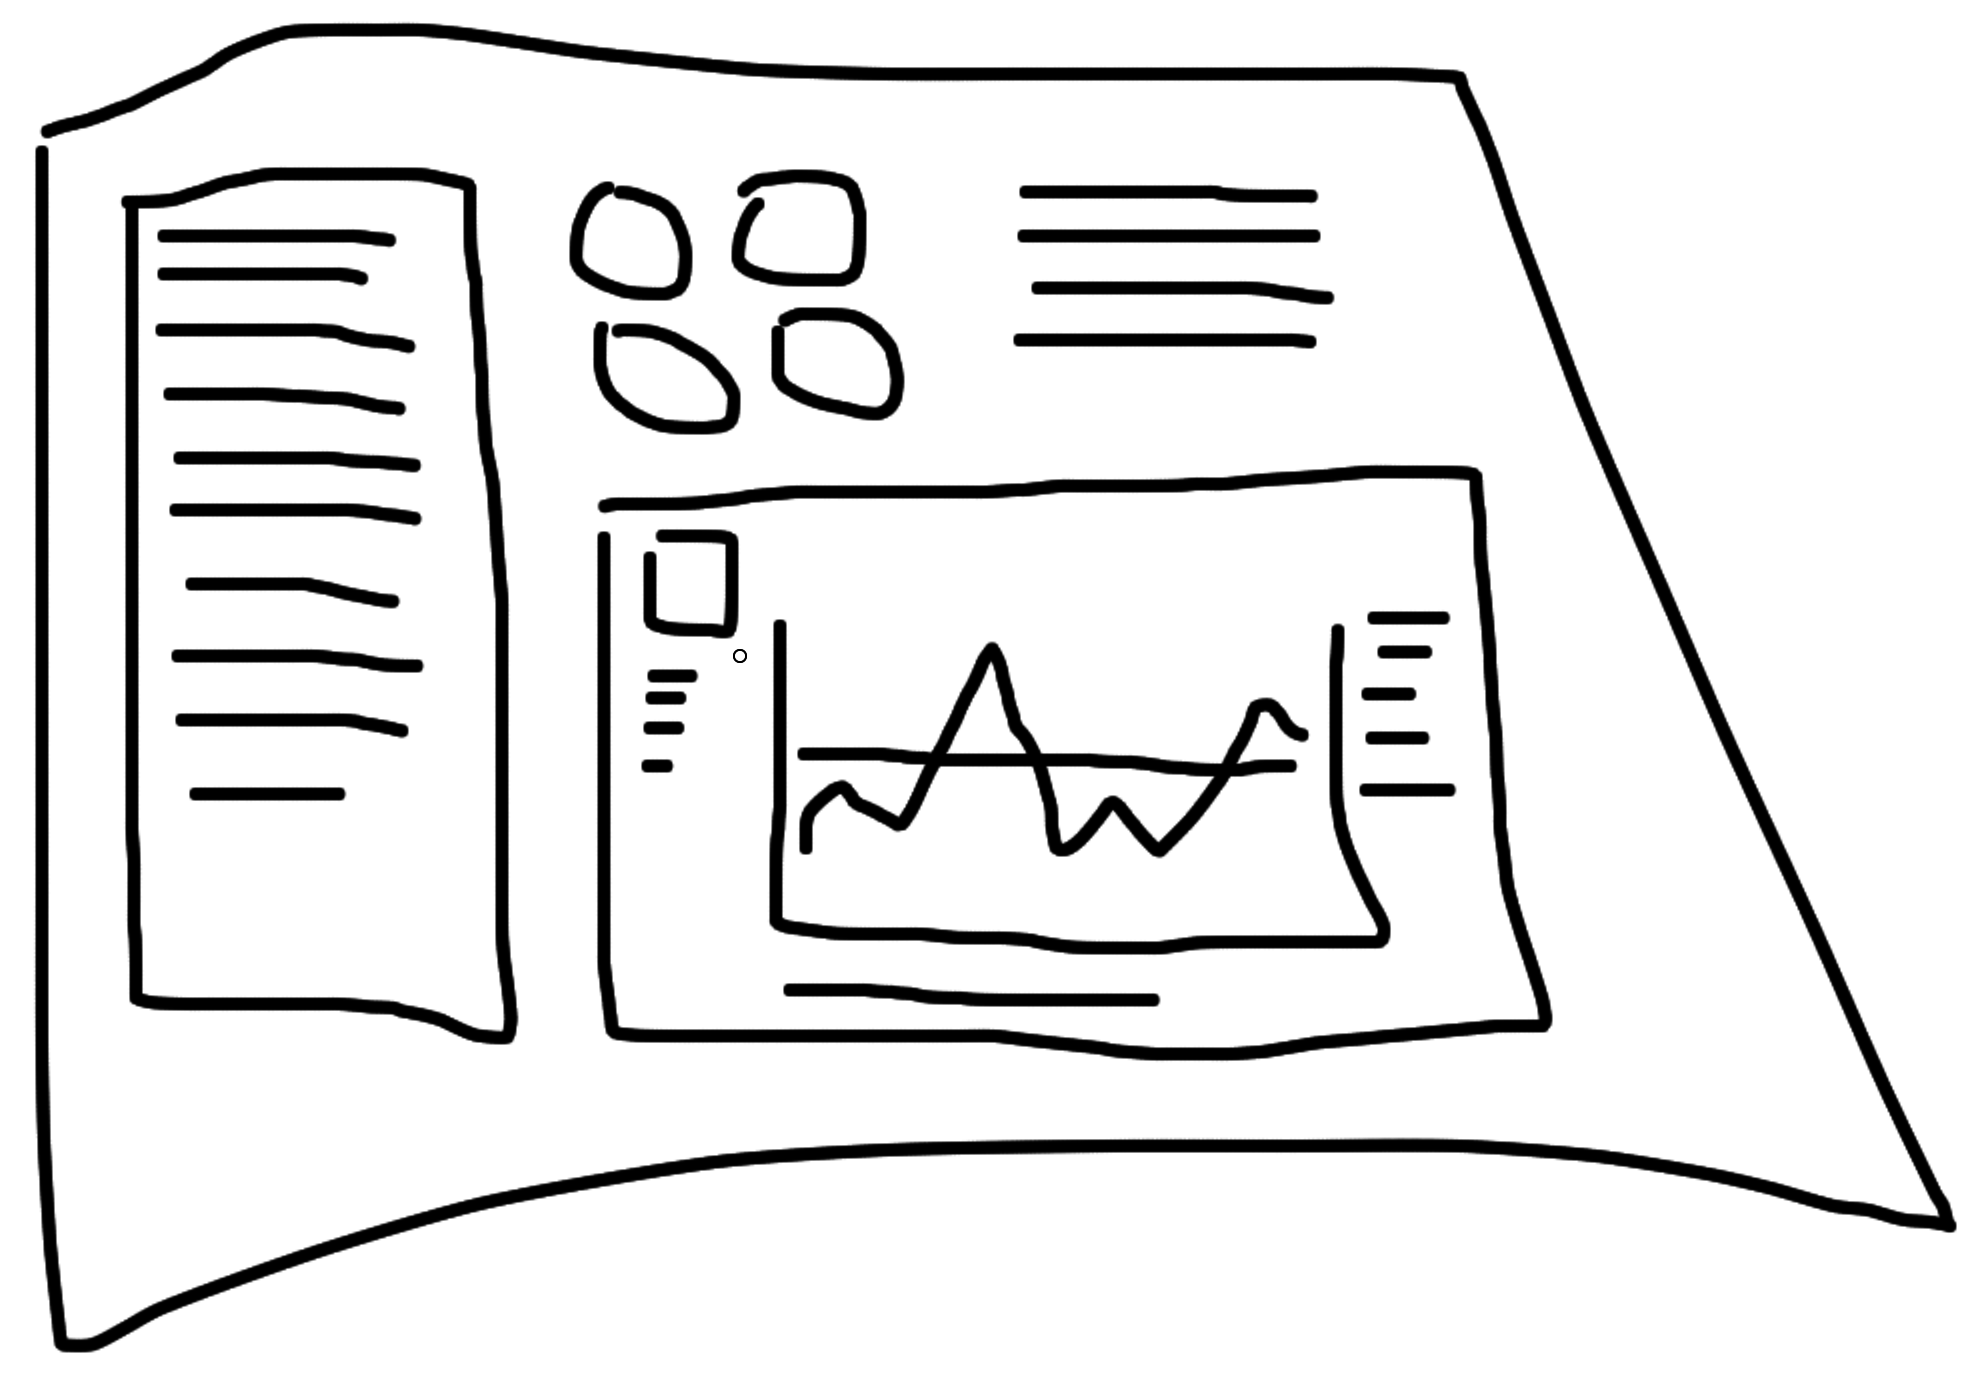 really bad drawing of a dashboard